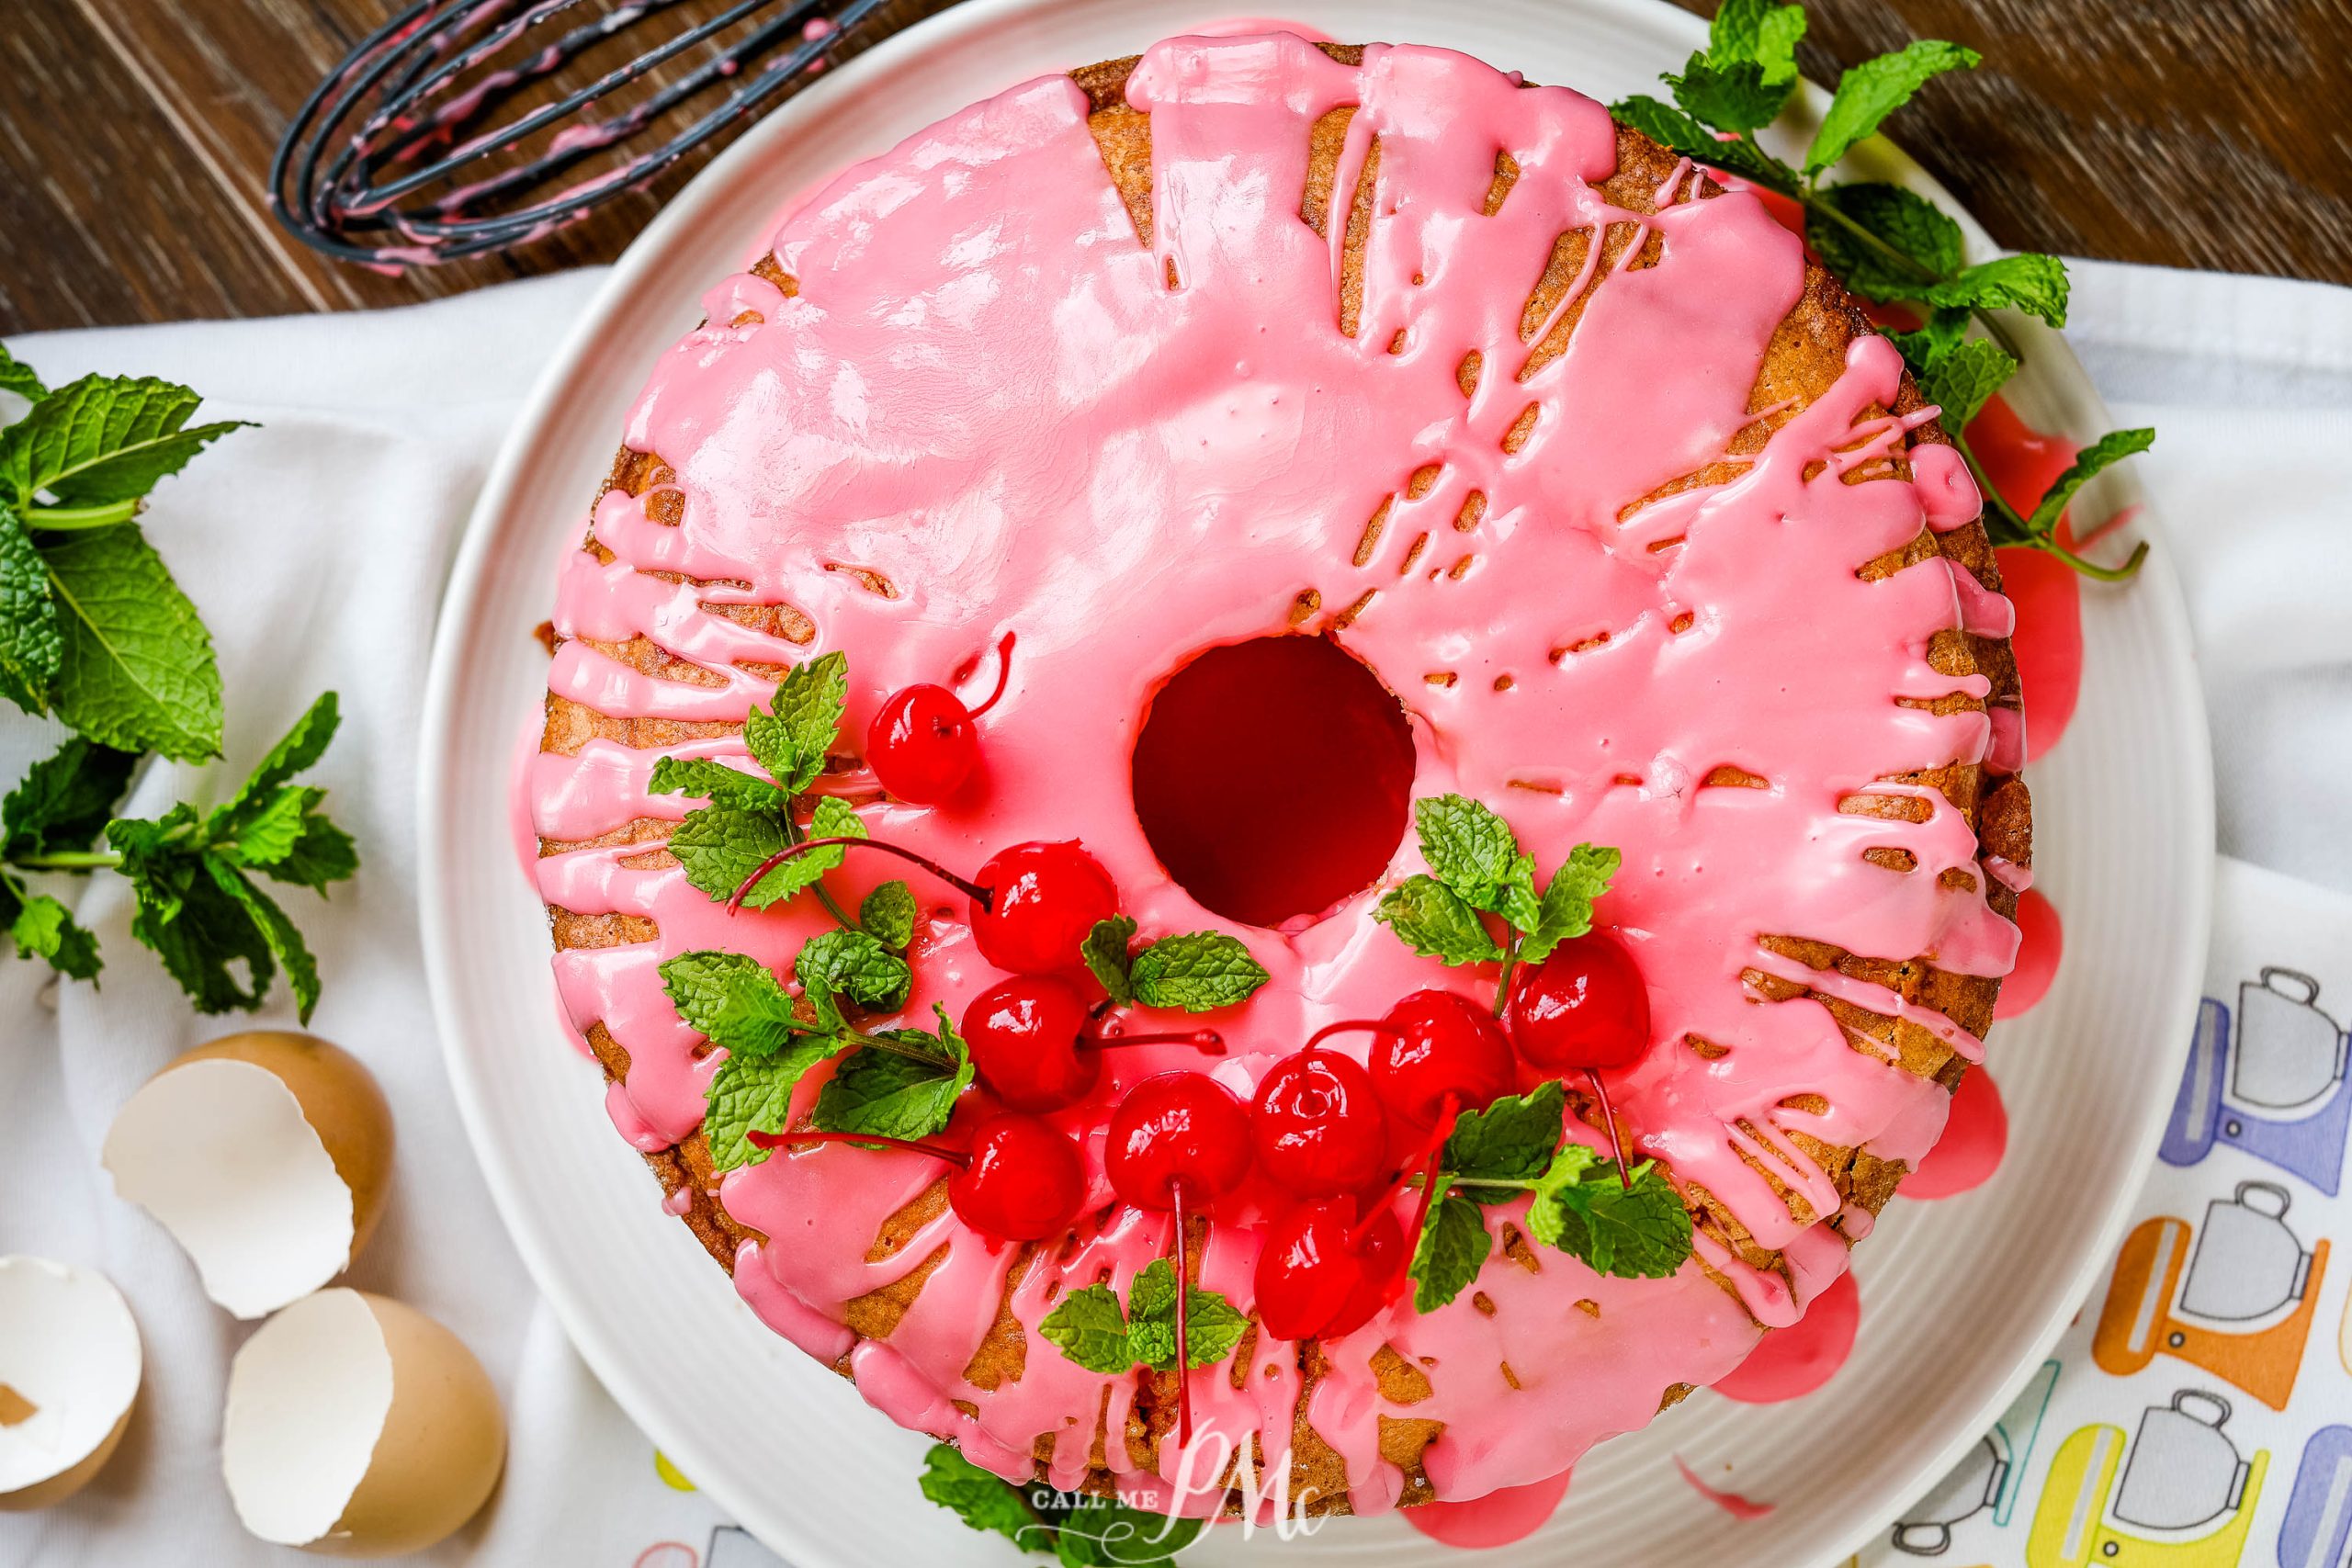 Flatlay of wohle pound cake with pink frosting.